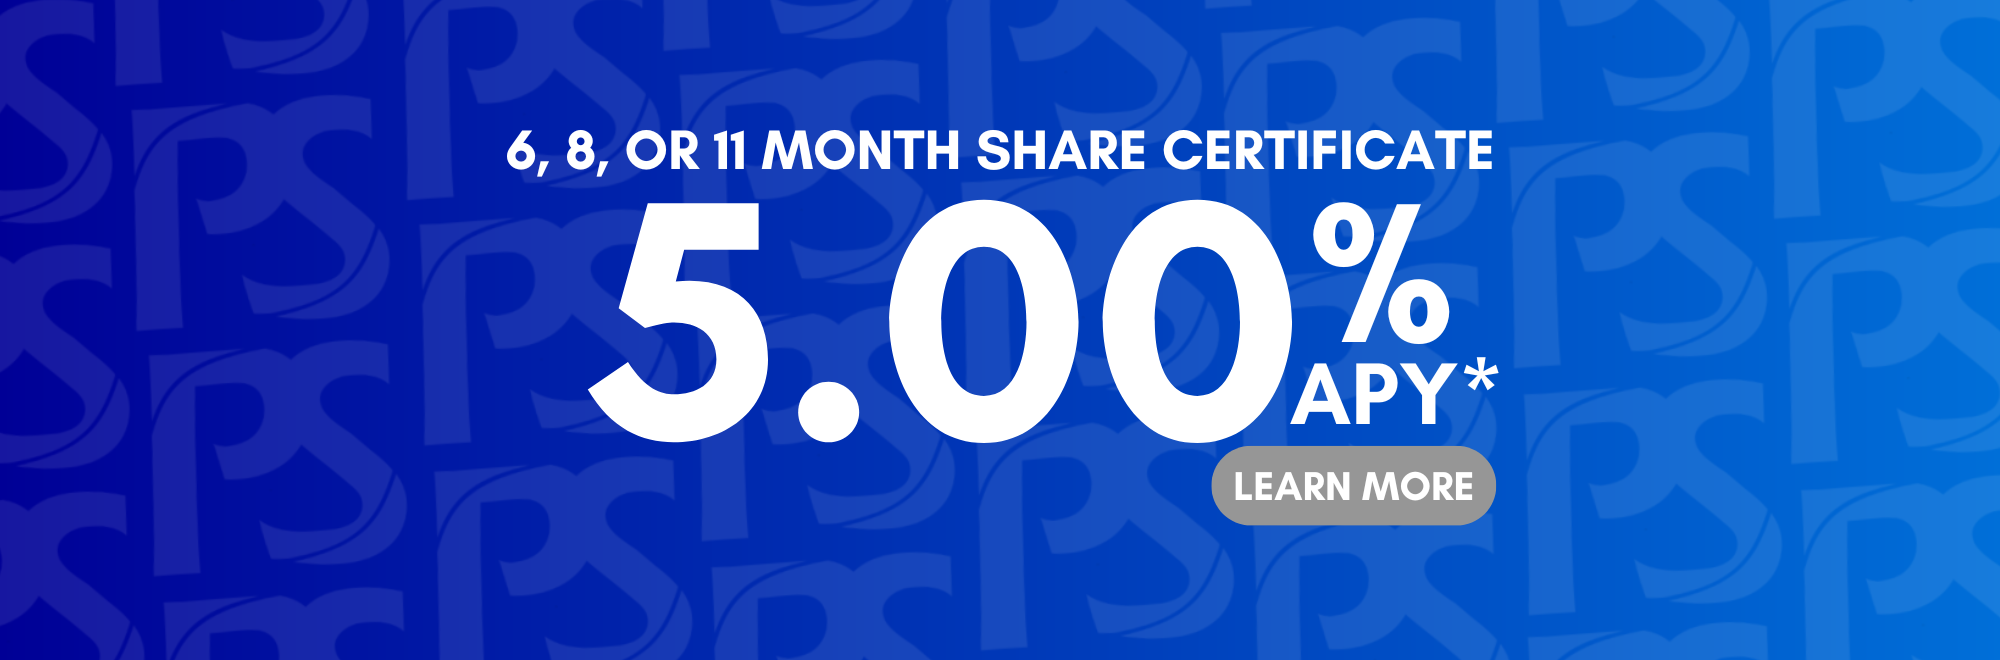 6, 8, or 11 month share certificate 5.00%APY*  Click to learn more